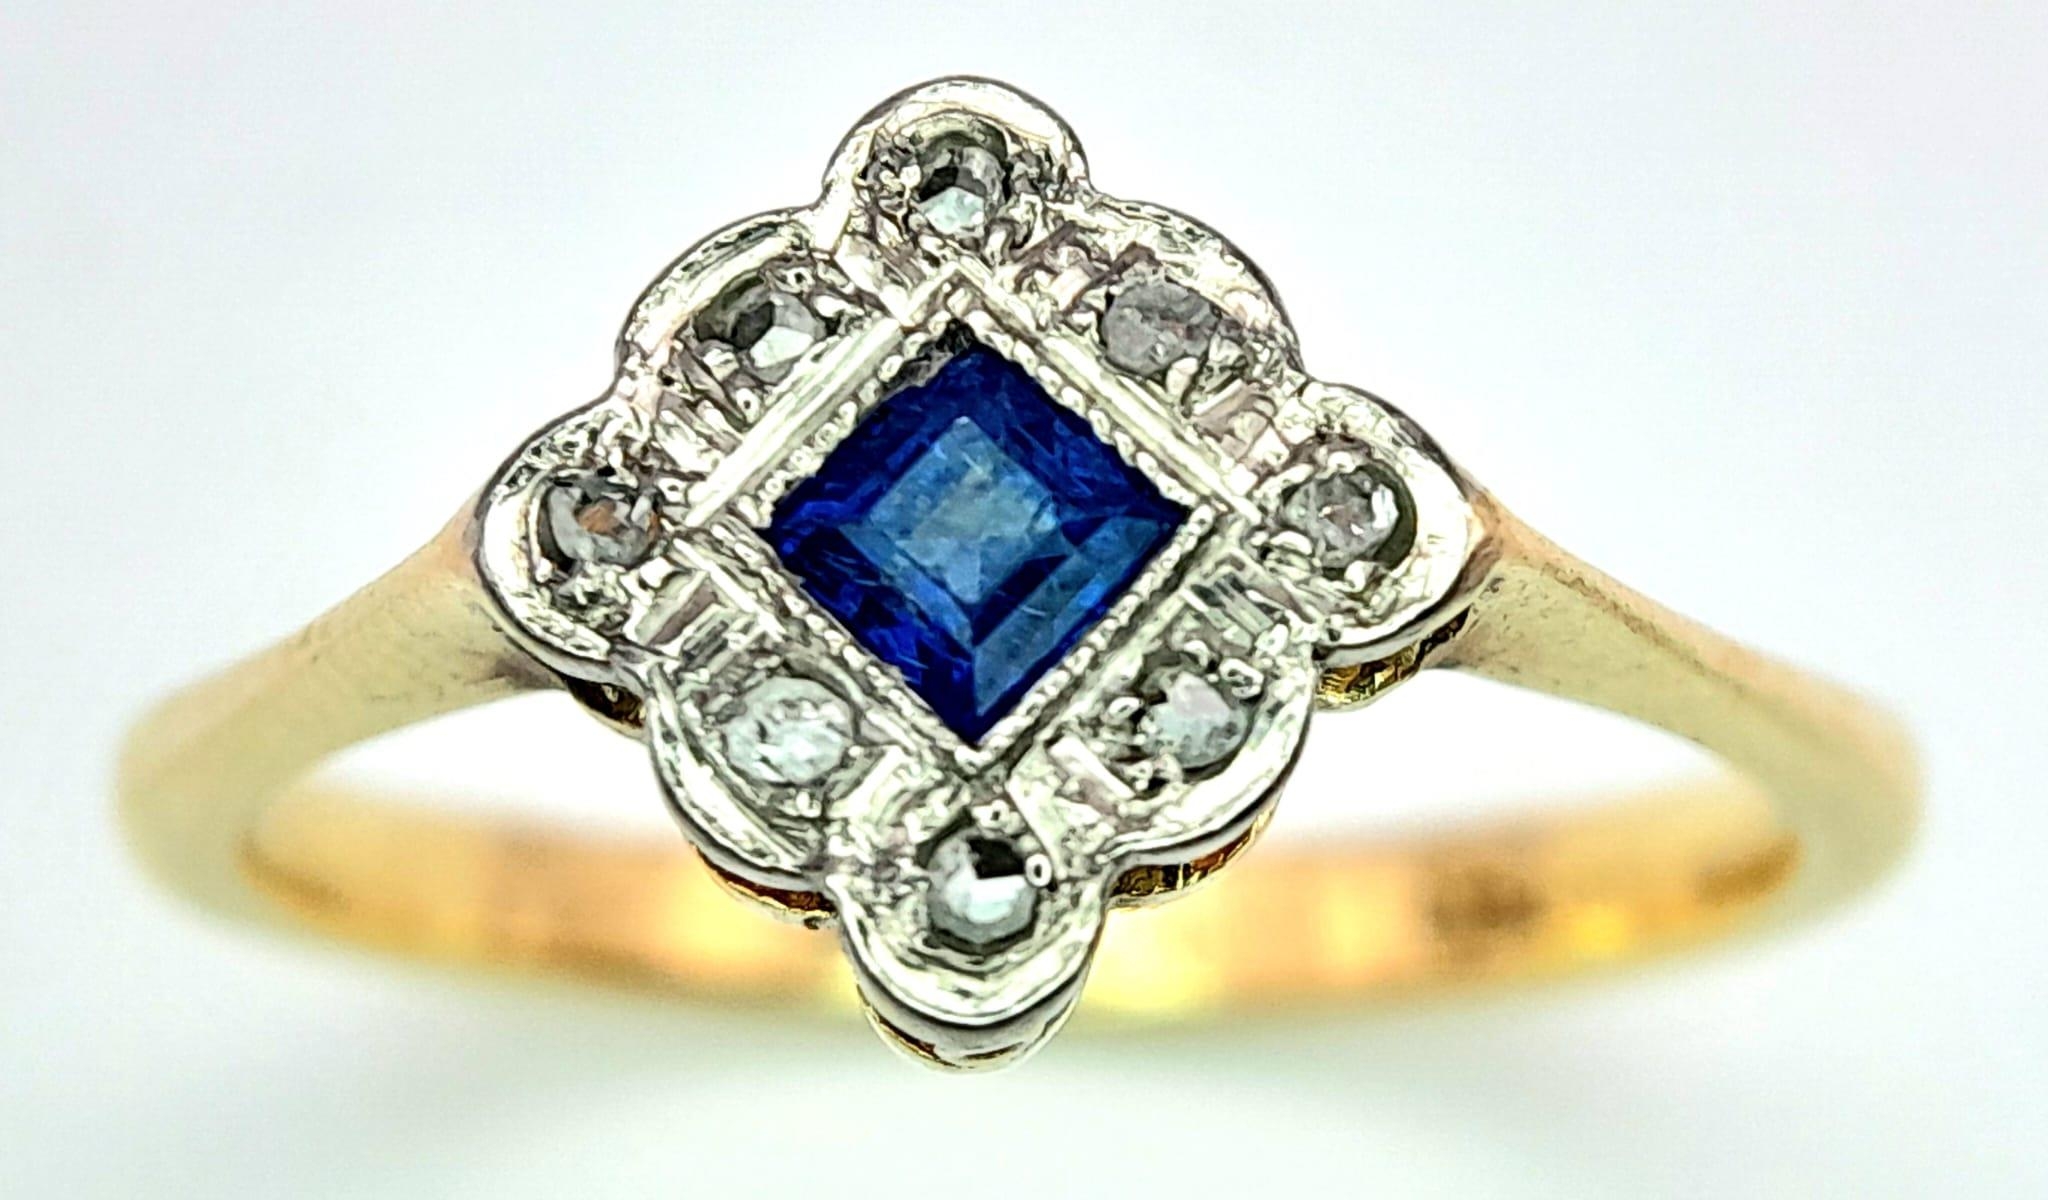 A VINTAGE 18K YELLOW GOLD, PLATINUM DIAMOND & SAPPHIRE RING. 3G. SIZE O. - Image 2 of 11